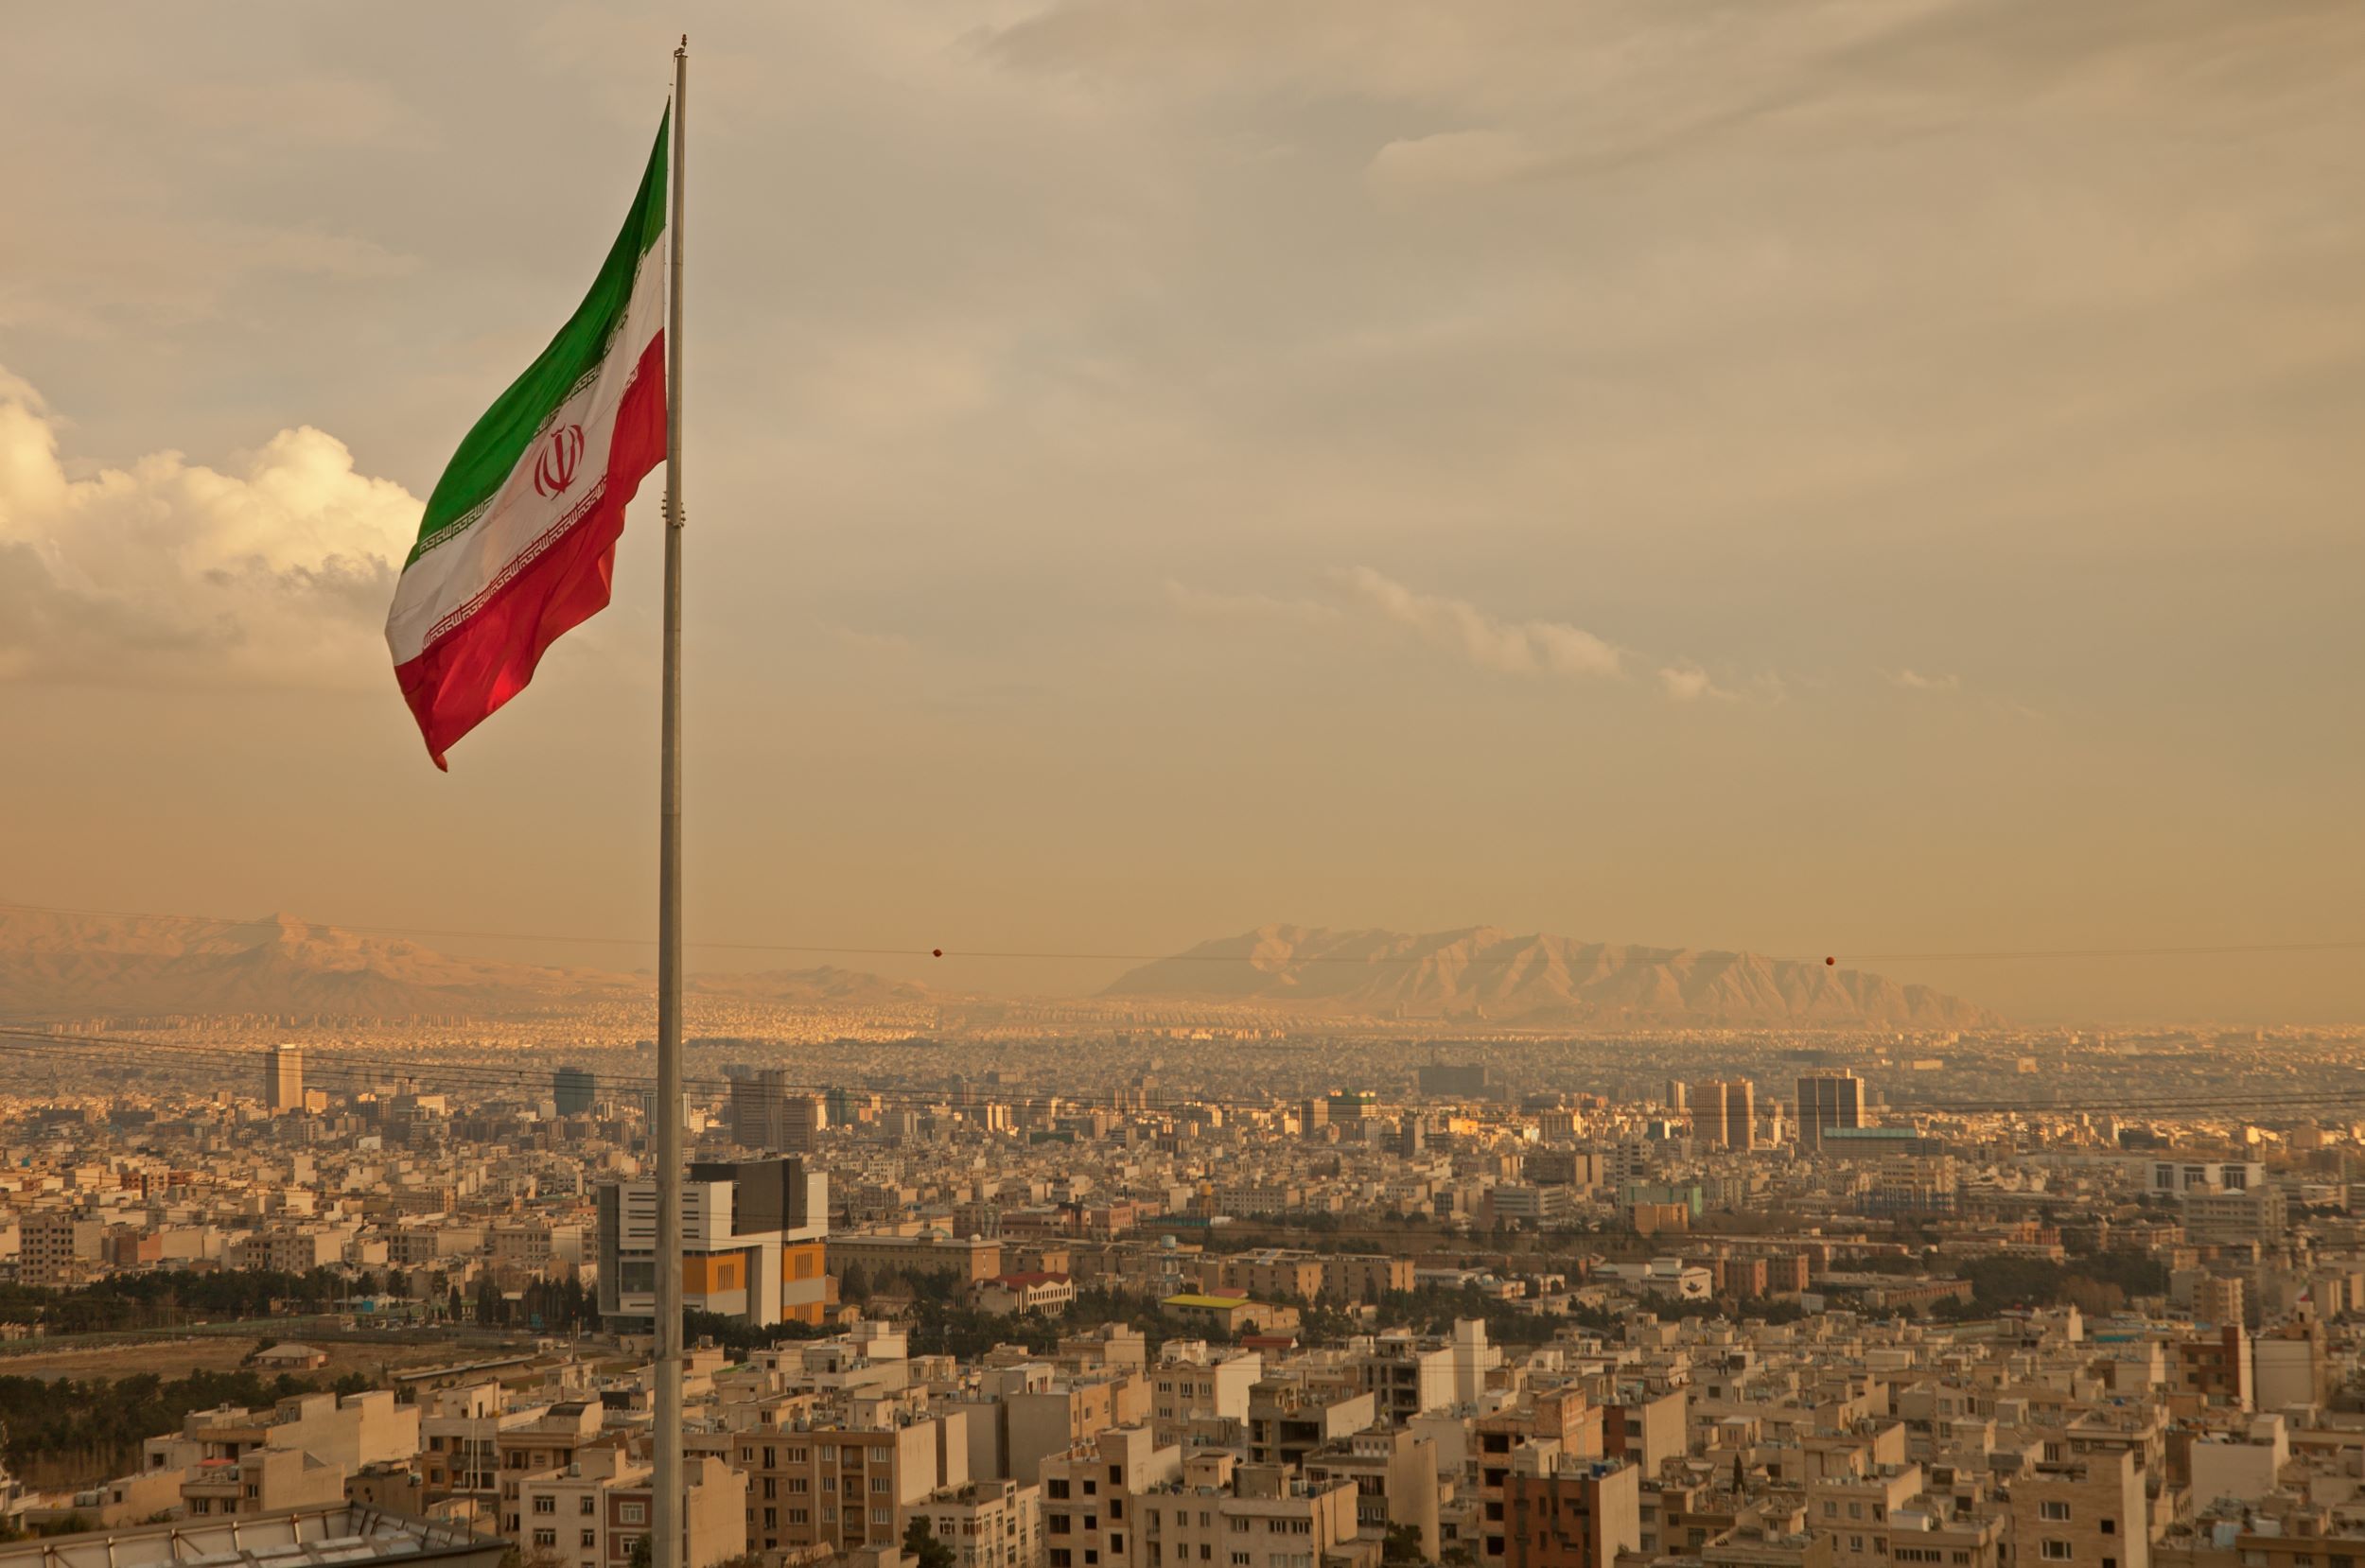 Iran Flag flying over city